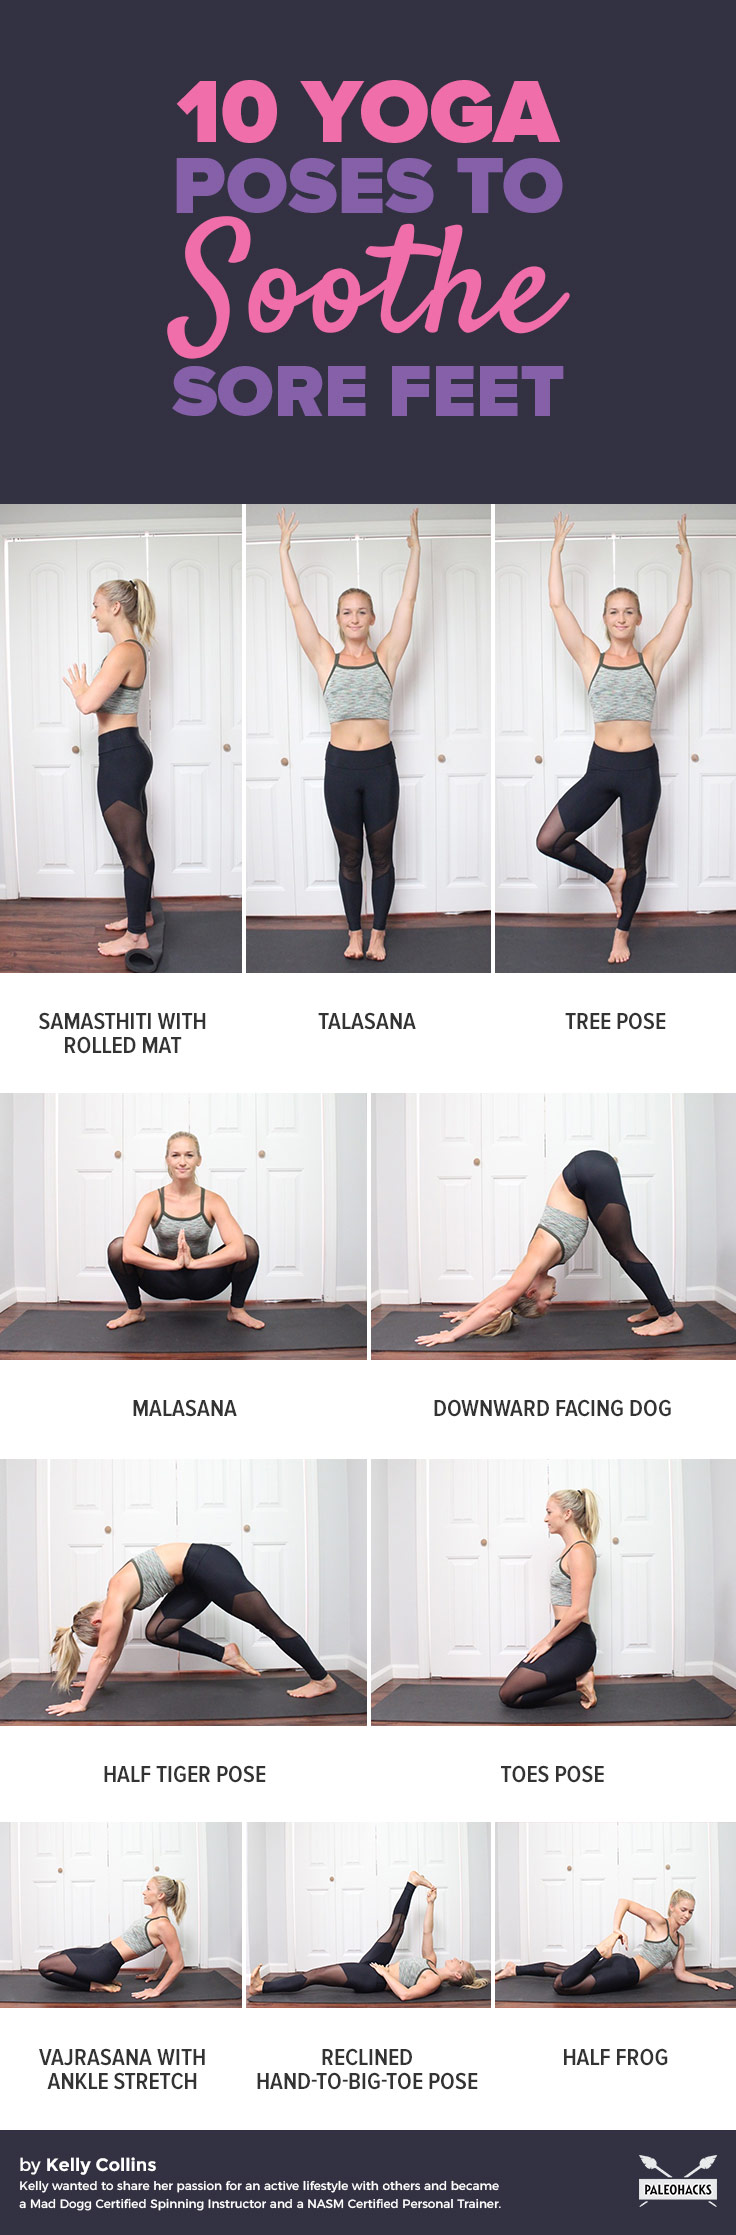 Spent the night walking in high heels? Have a job that keeps you on your feet all day? Use these easy yoga moves to ease achy feet.